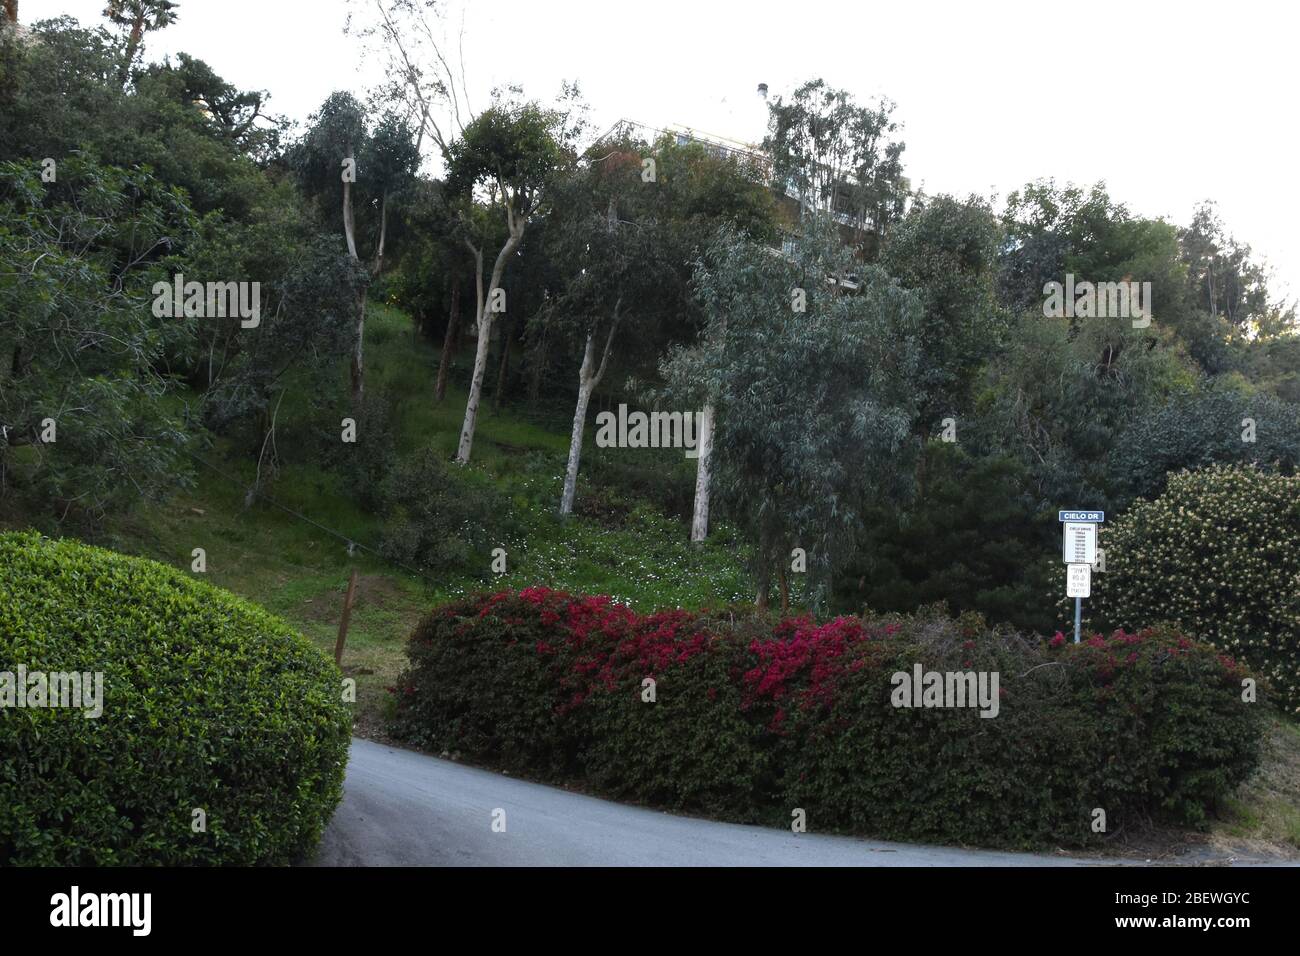 Beverly Hills, California, USA 15th April 2020 A general view of atmosphere of Cielo Drive where Shaton Tate Lived and Mansion Murders took place on 10050 Cielo Drive in Beverly Hills, California, USA. Photo by Barry King/Alamy Stock Photo Stock Photo